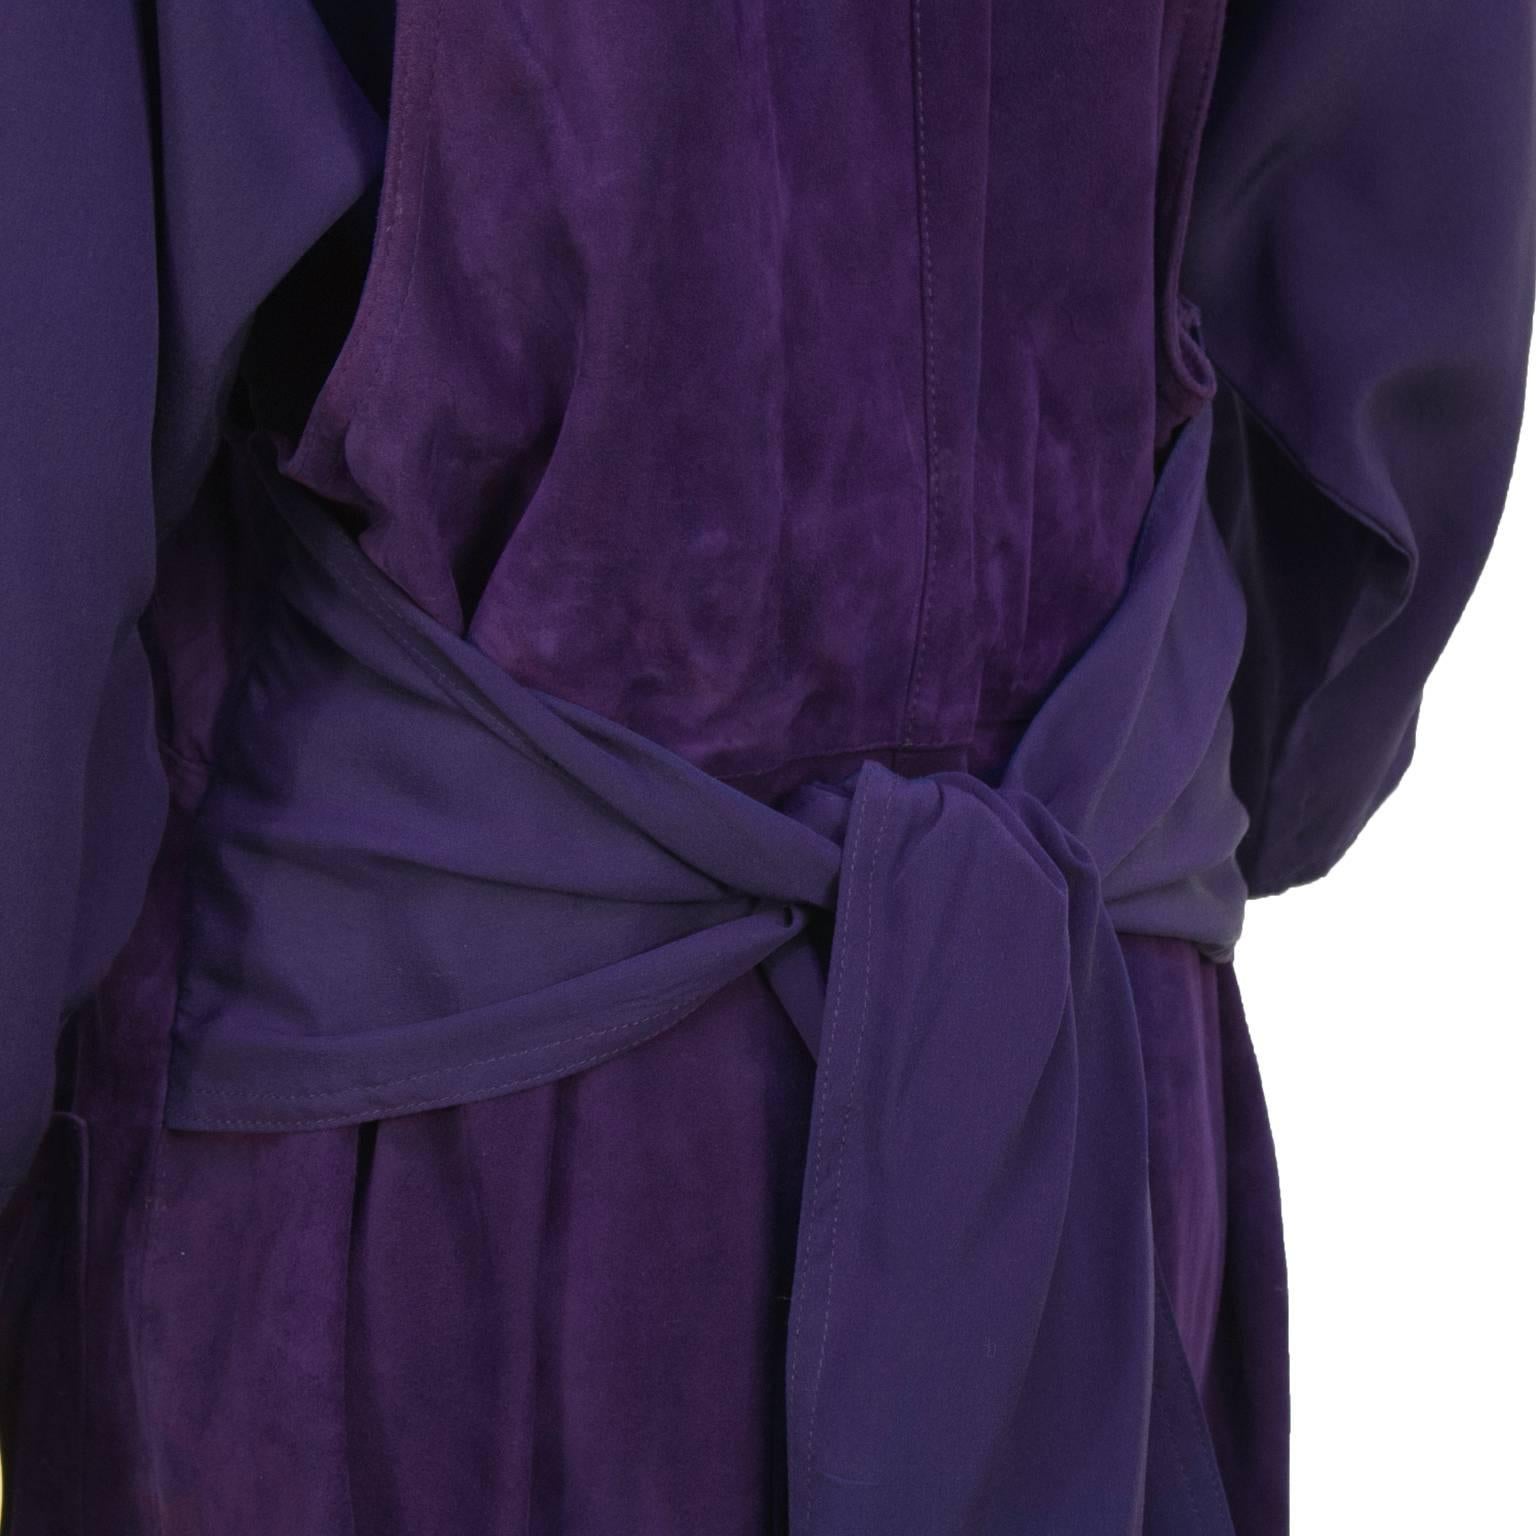 Women's 1970's Plum Suede and Rayon Crepe Dress  For Sale